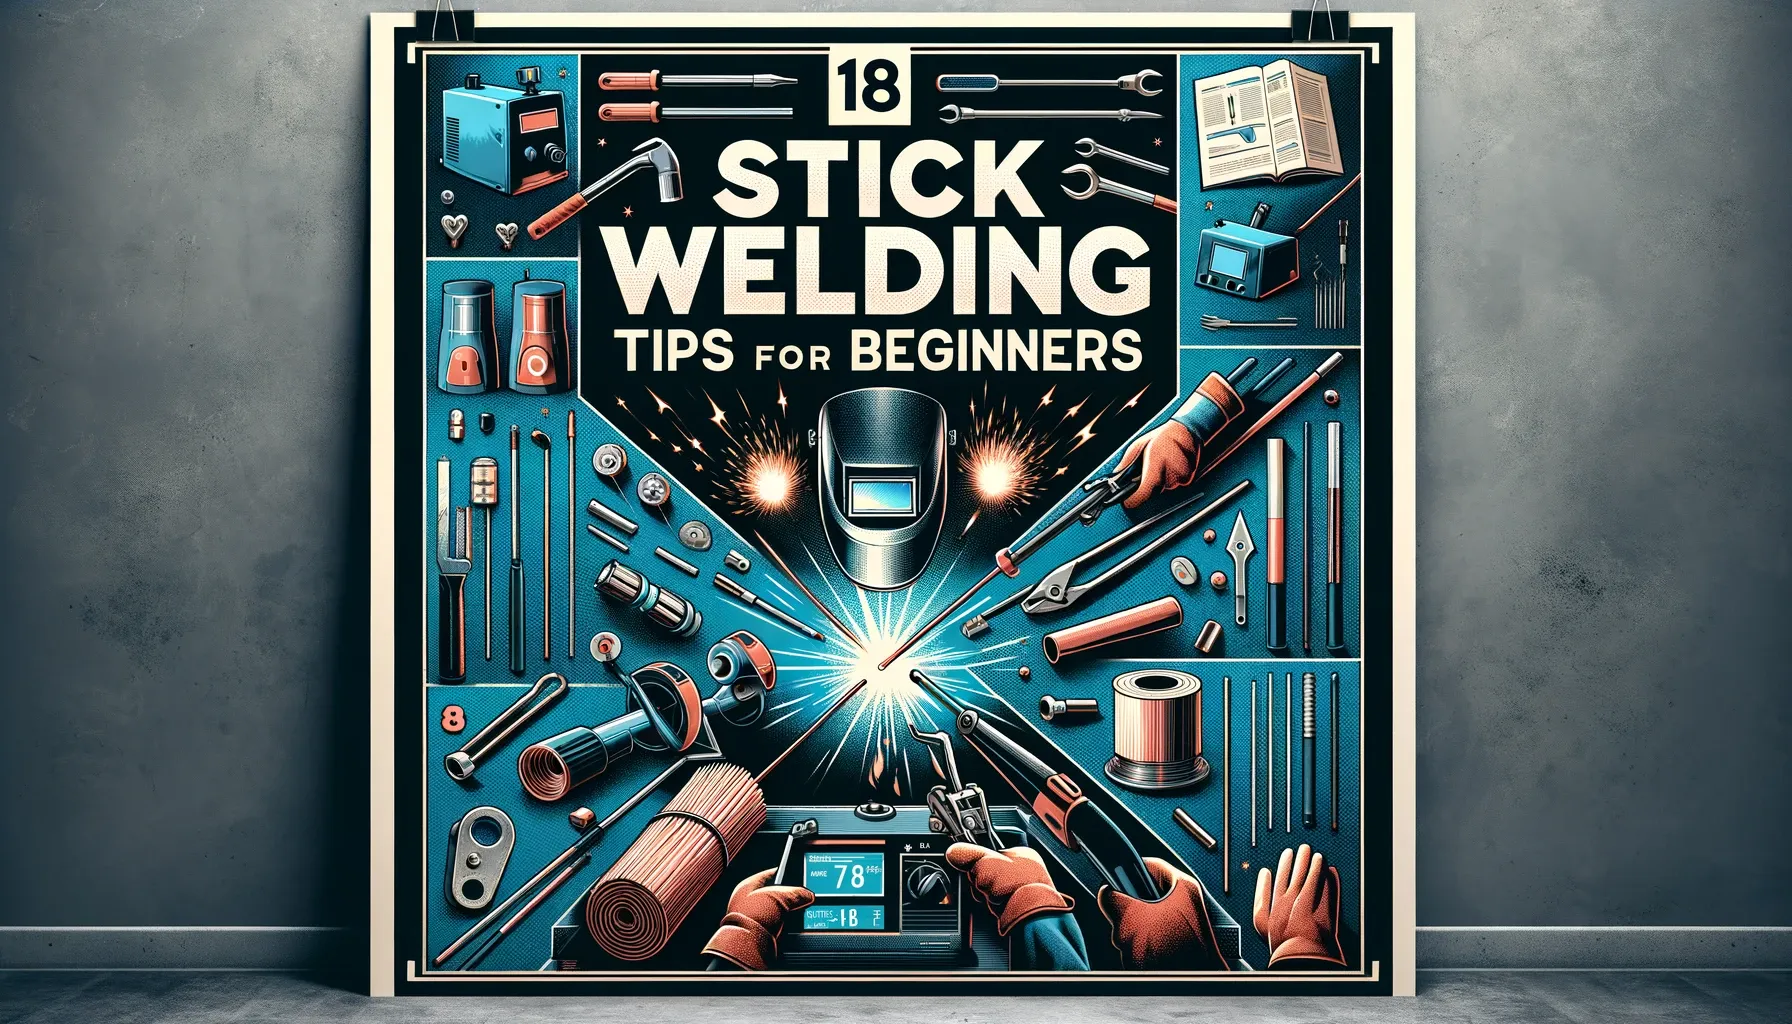 Stick Welding Tips and Tricks